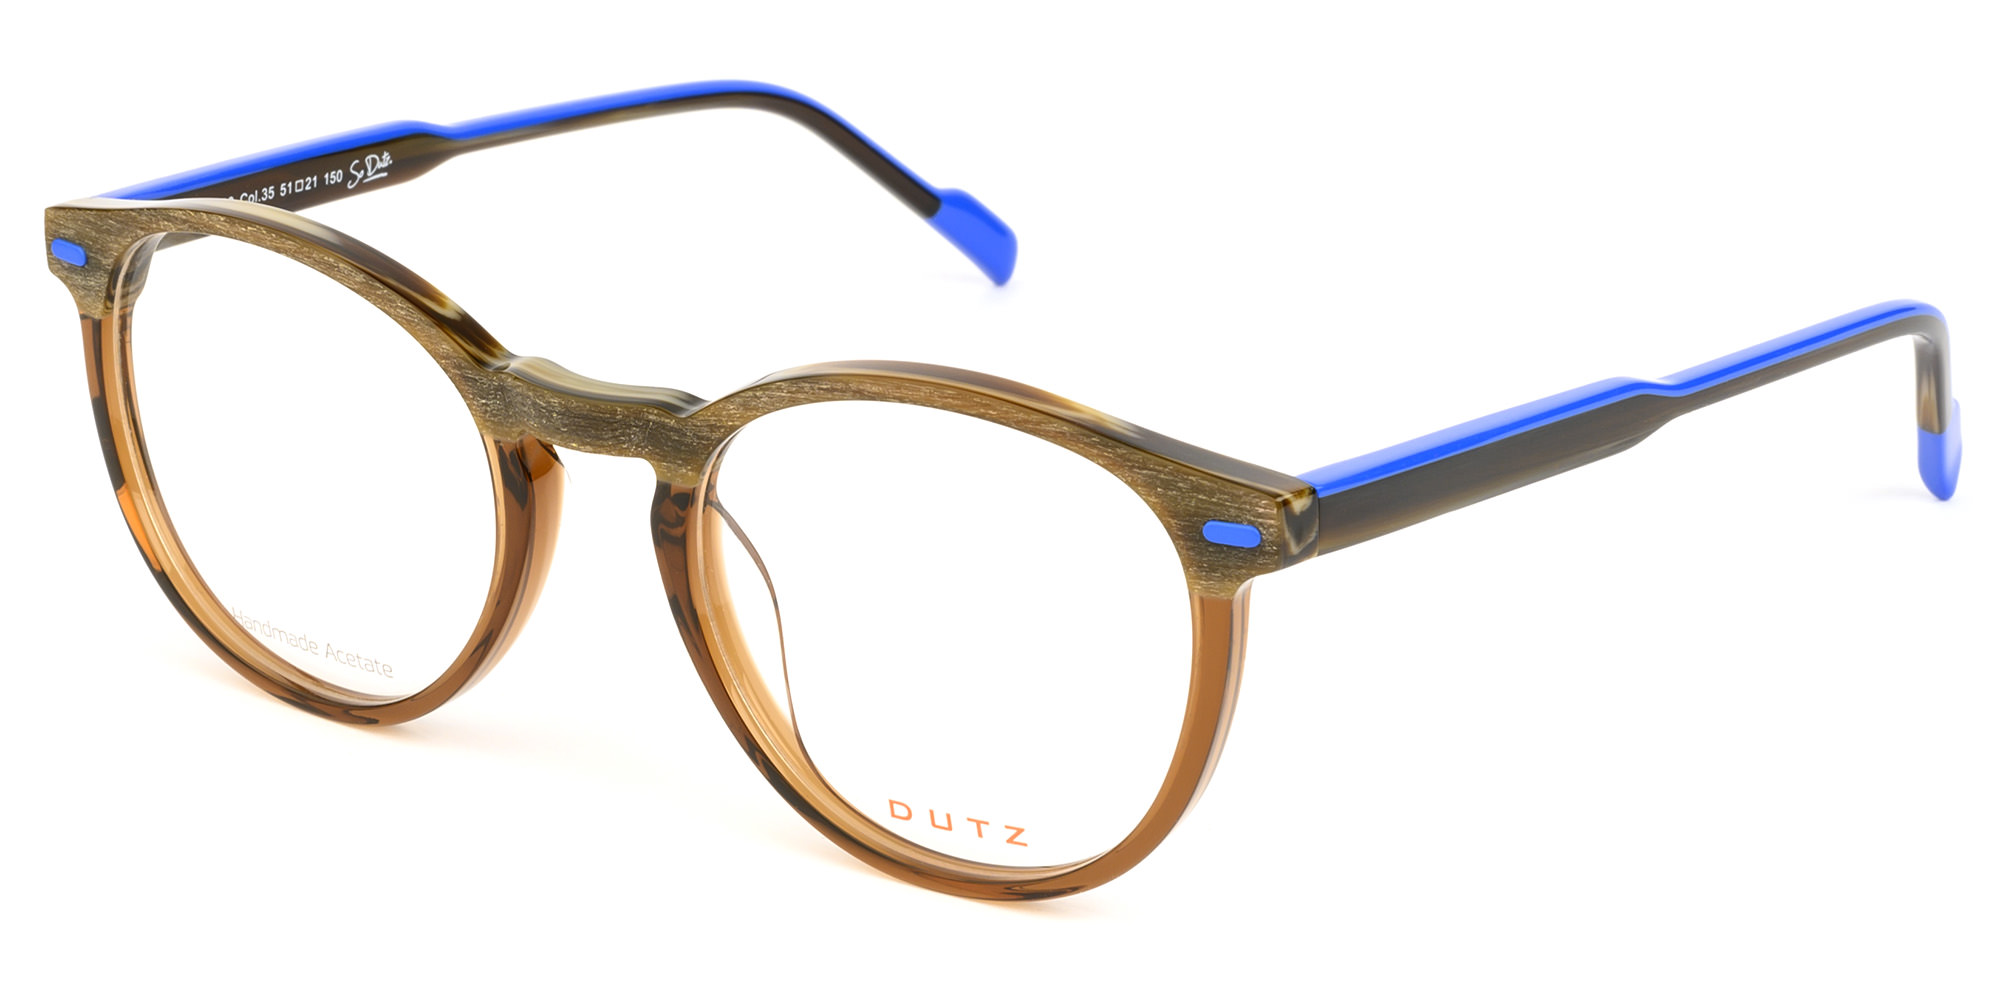 Bi-color, brown acetate frame and temples, combined with bright blue details